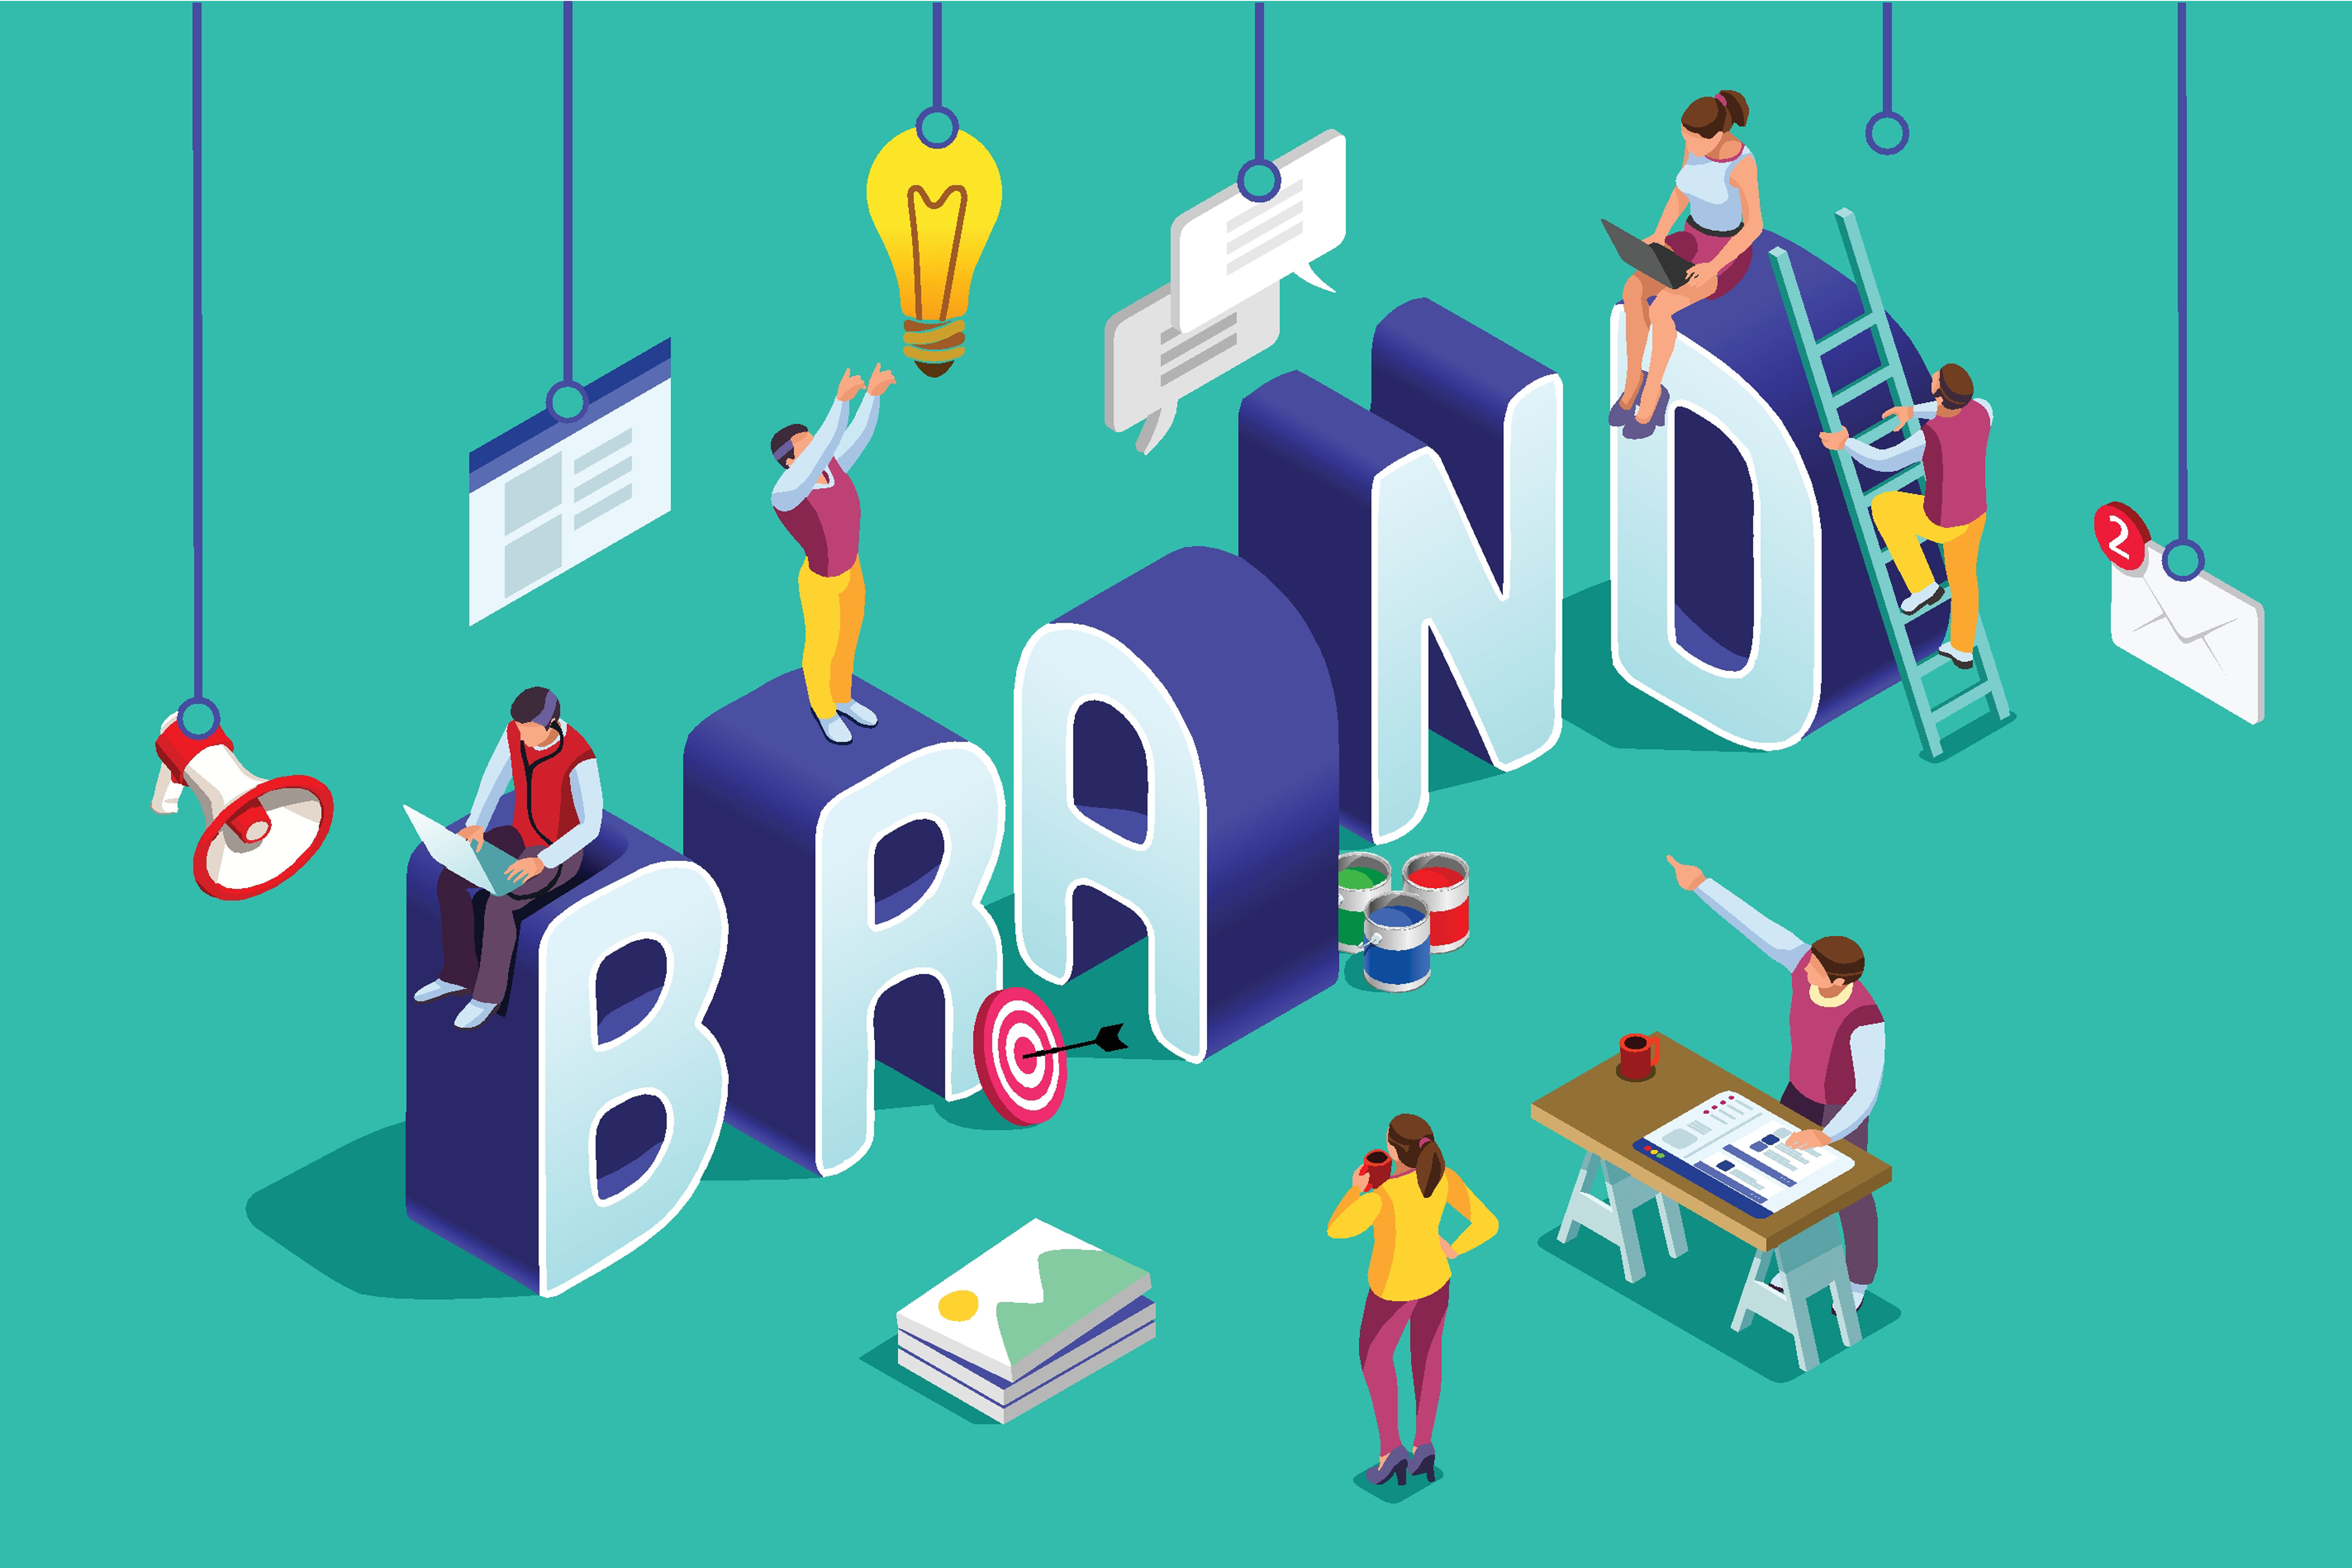 BYOB: Build Your Online Brand on June 5th